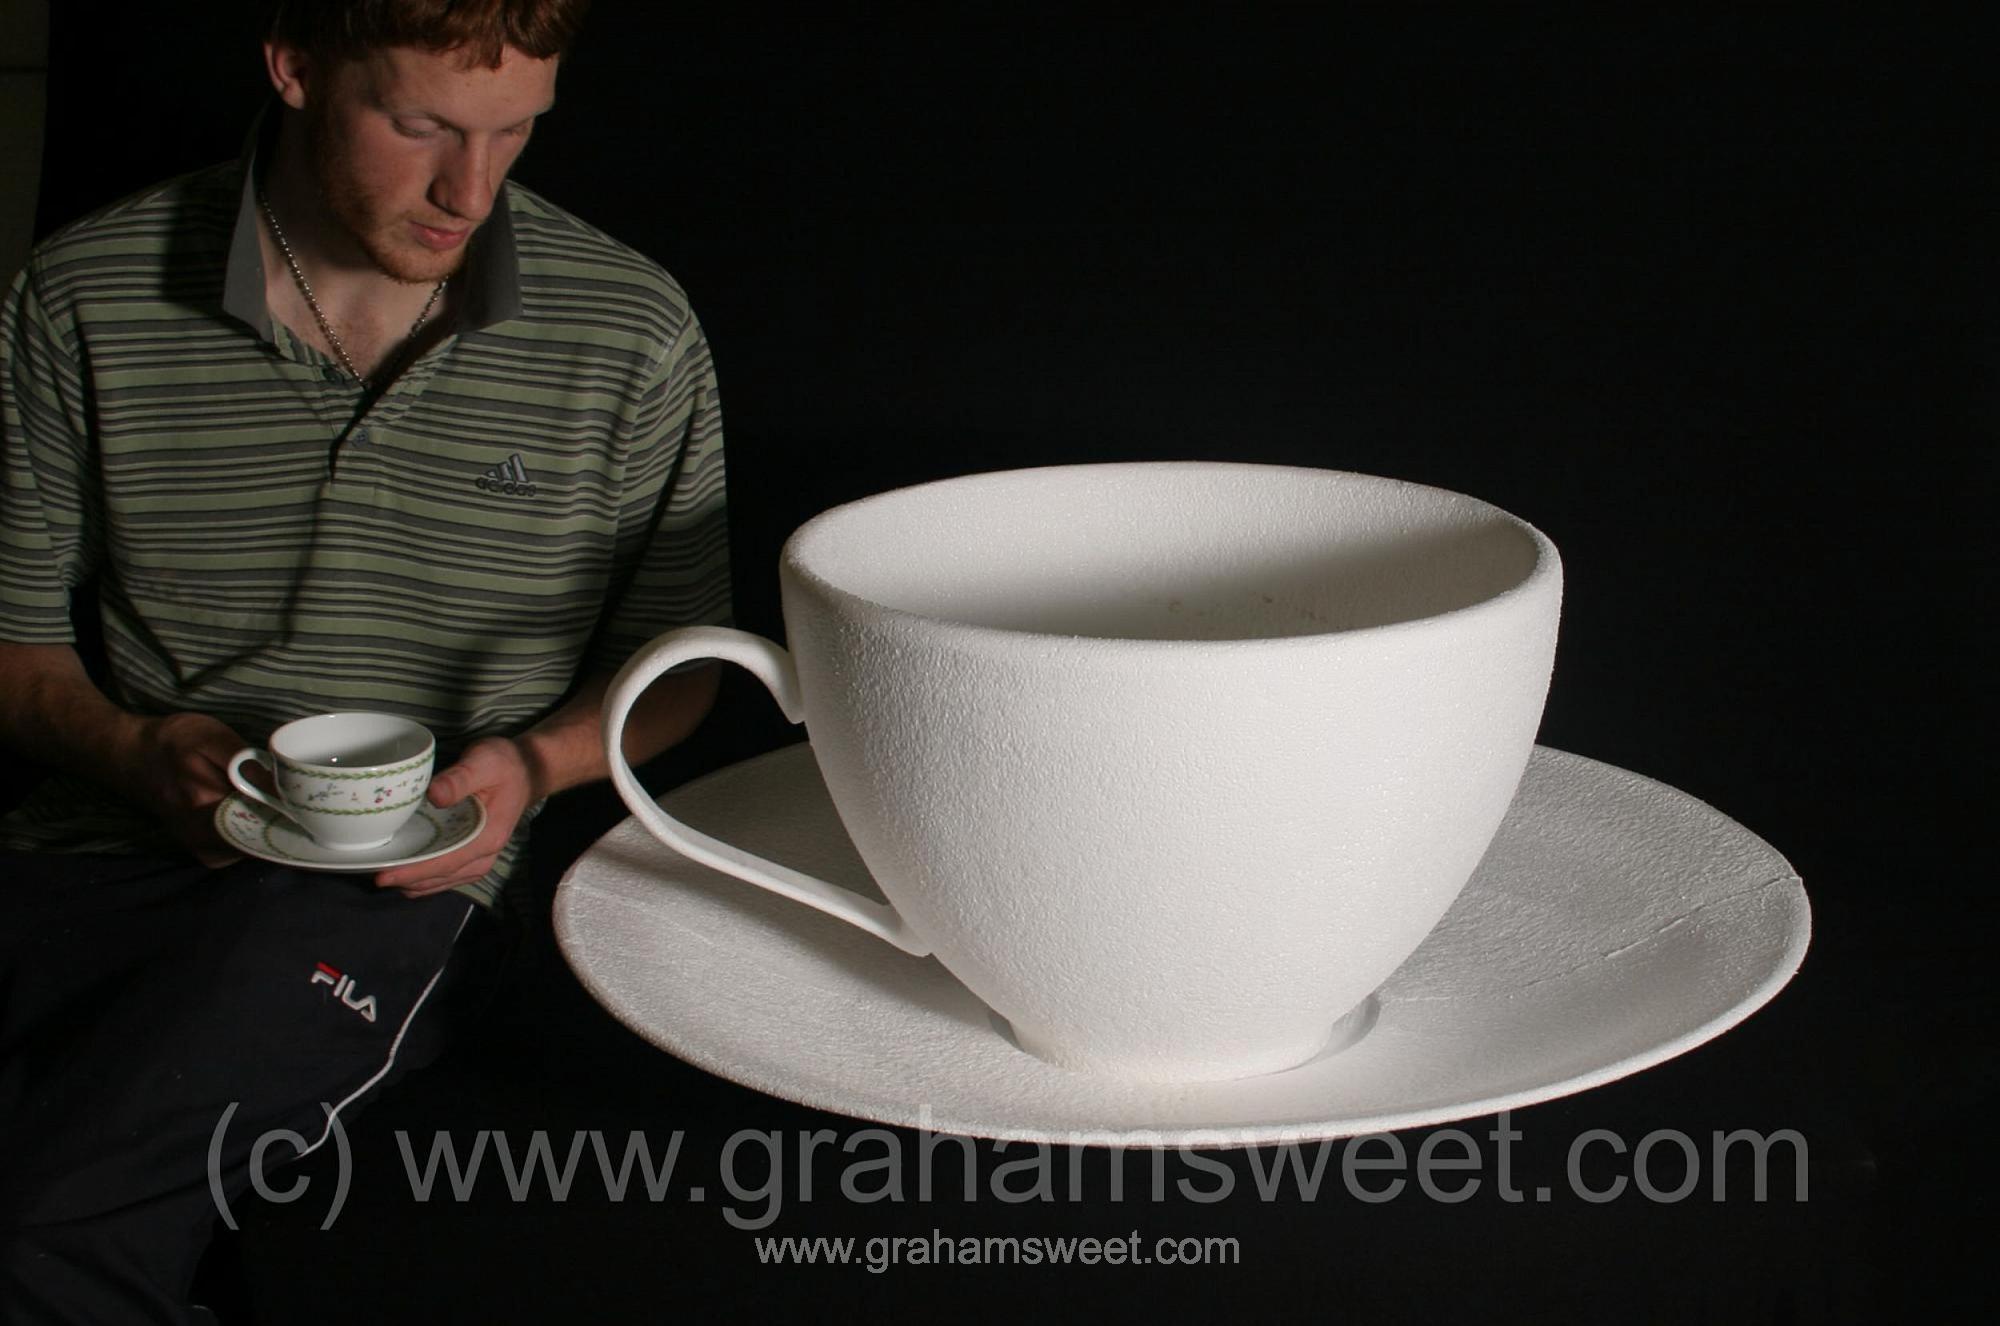 polystyrene cup and saucer